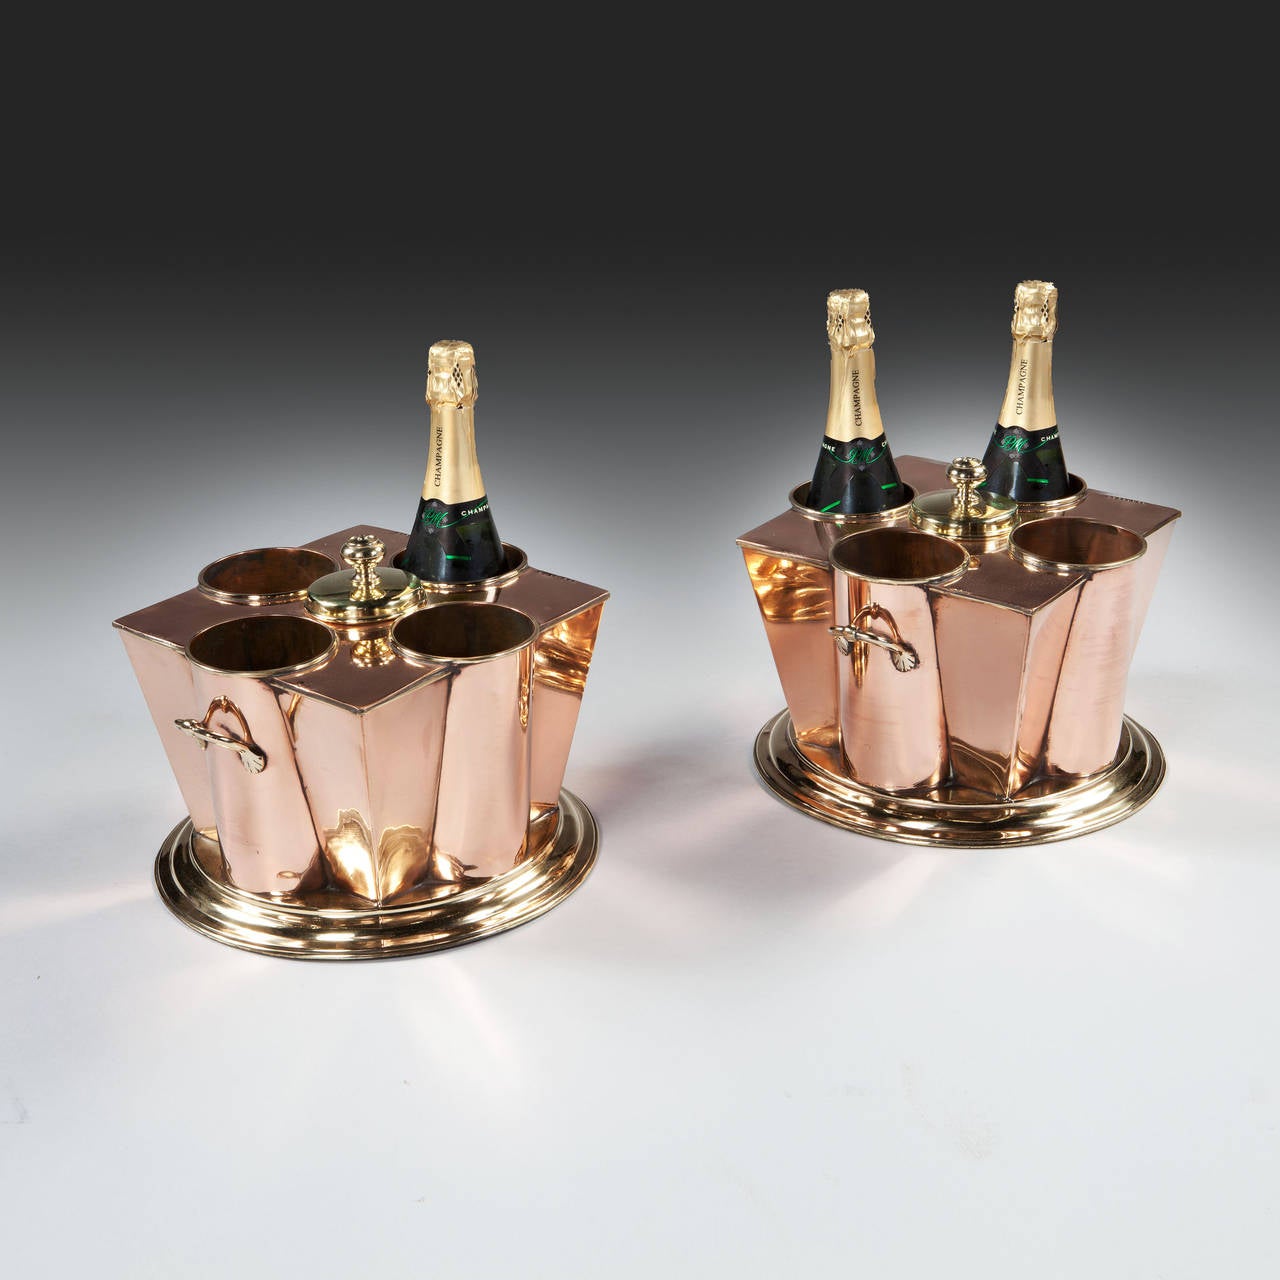 A fine pair of mid 20th century copper and brass champagne coolers of square tapered outline, each fitted with four bottle holders with twin handles on a circular stepped base, each stamped 'WHITE STAR' 'SS BOSTON'. 

Attributed to G. PEAK & CO.